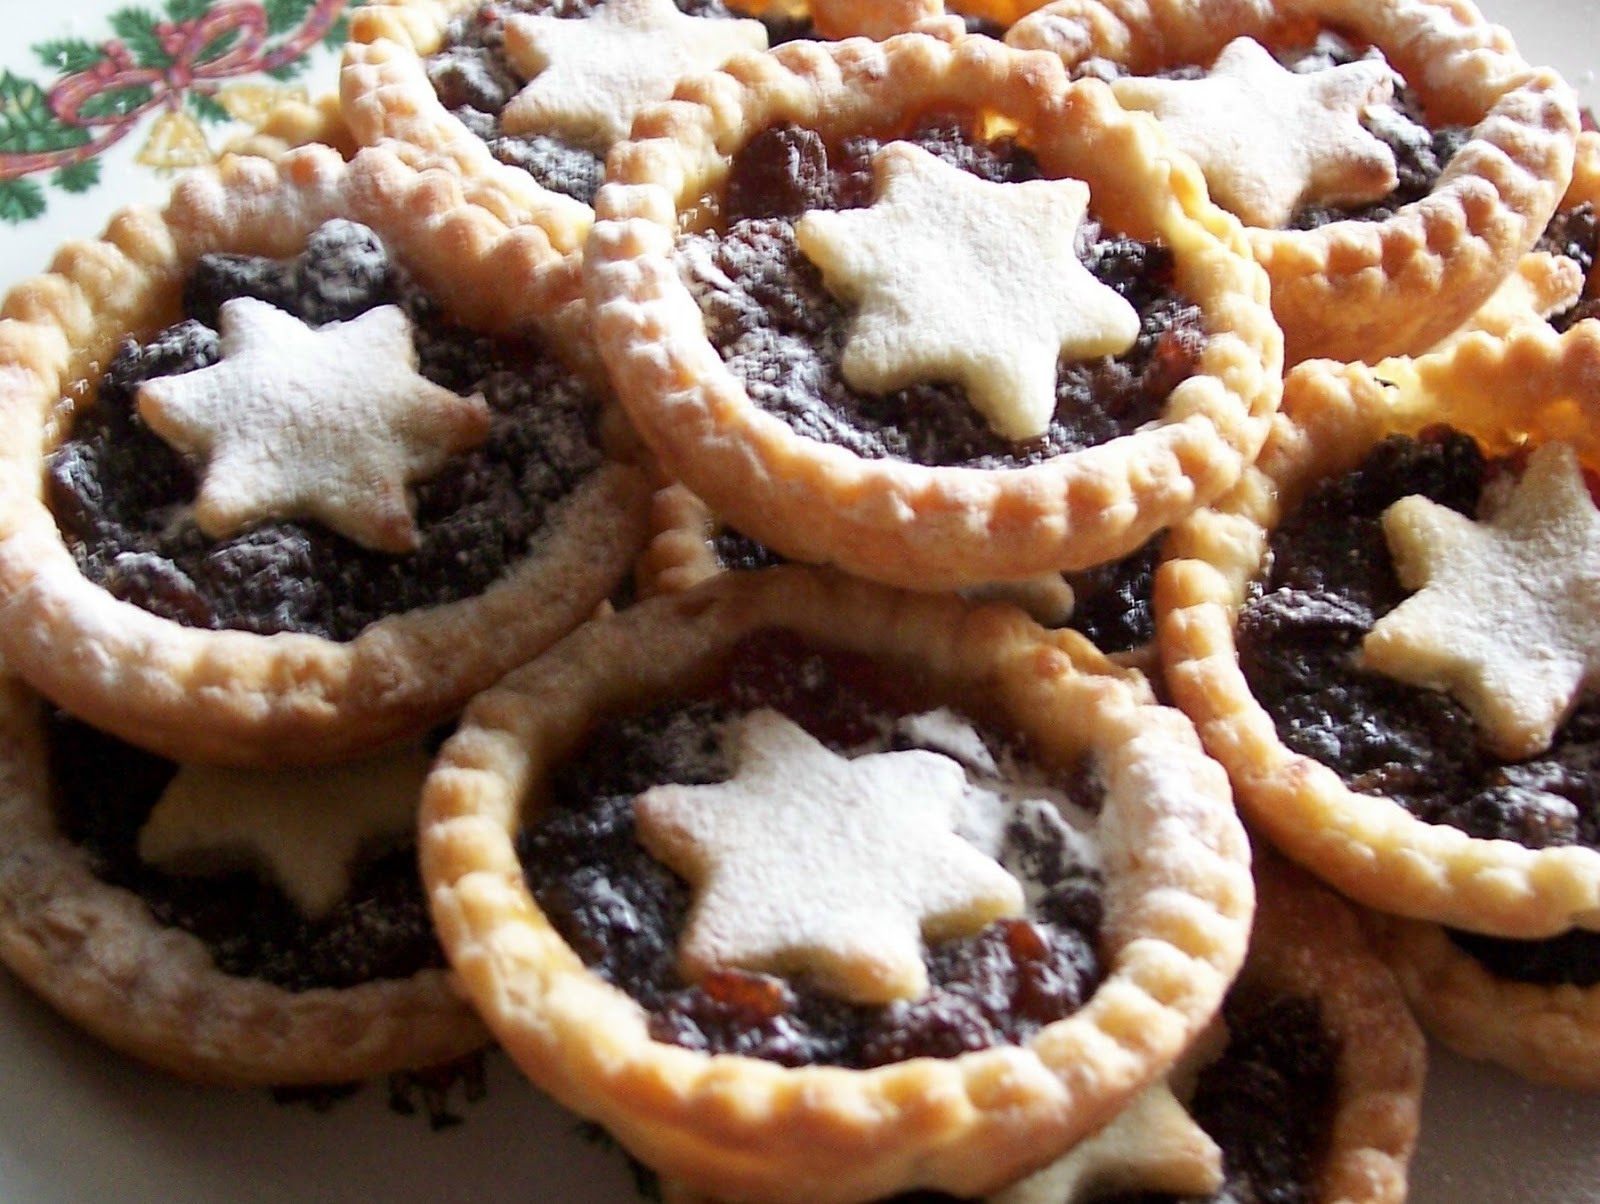 Slimming world: mince pies